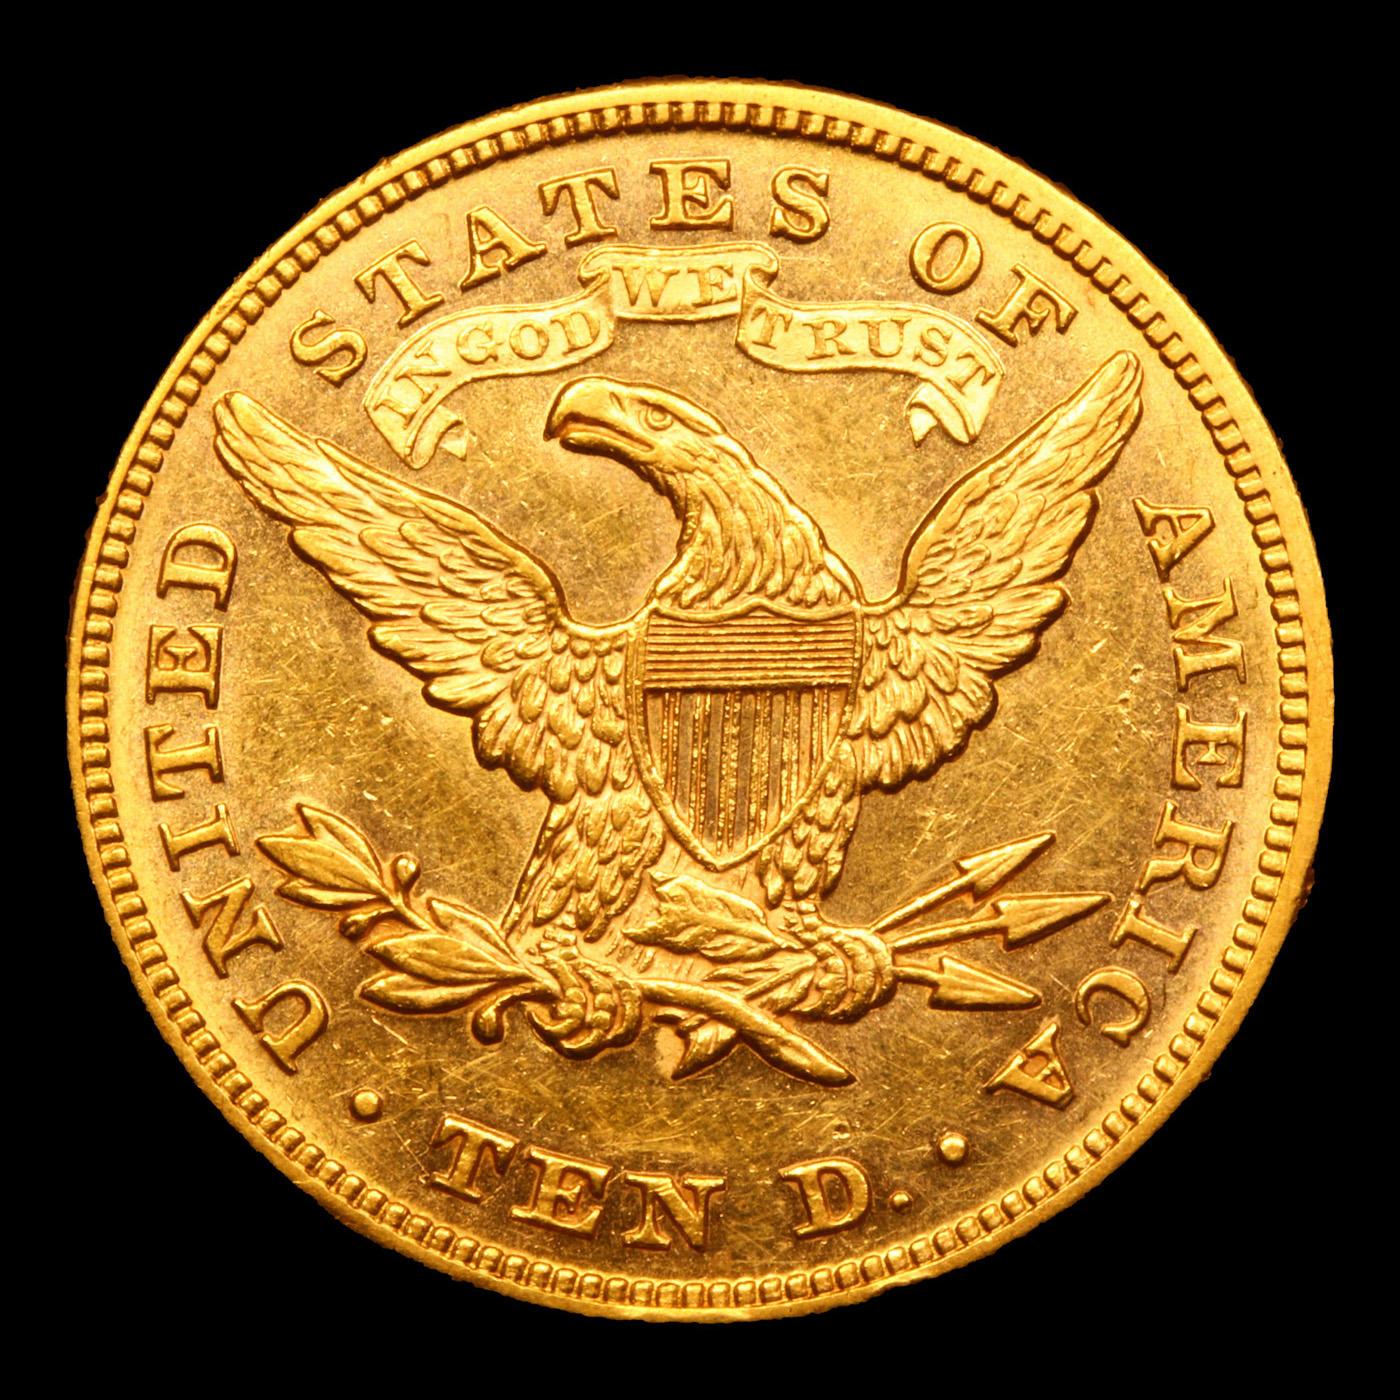 *HIGHLIGHT OF NIGHT* 1874-p Gold Liberty Eagle $10 Graded Select Unc PL By USCG (fc)